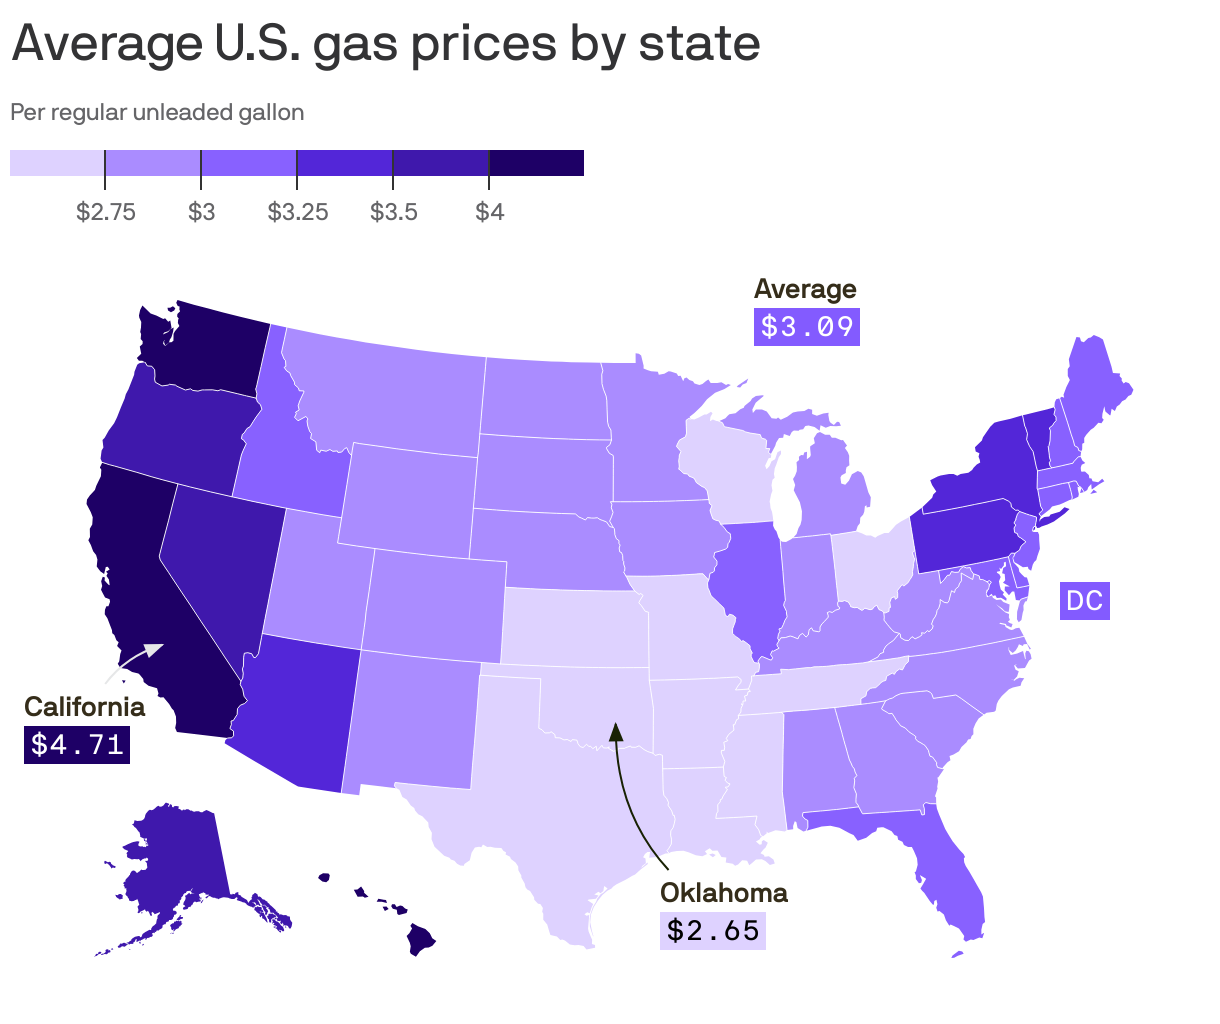 Average U.S. gas prices by state